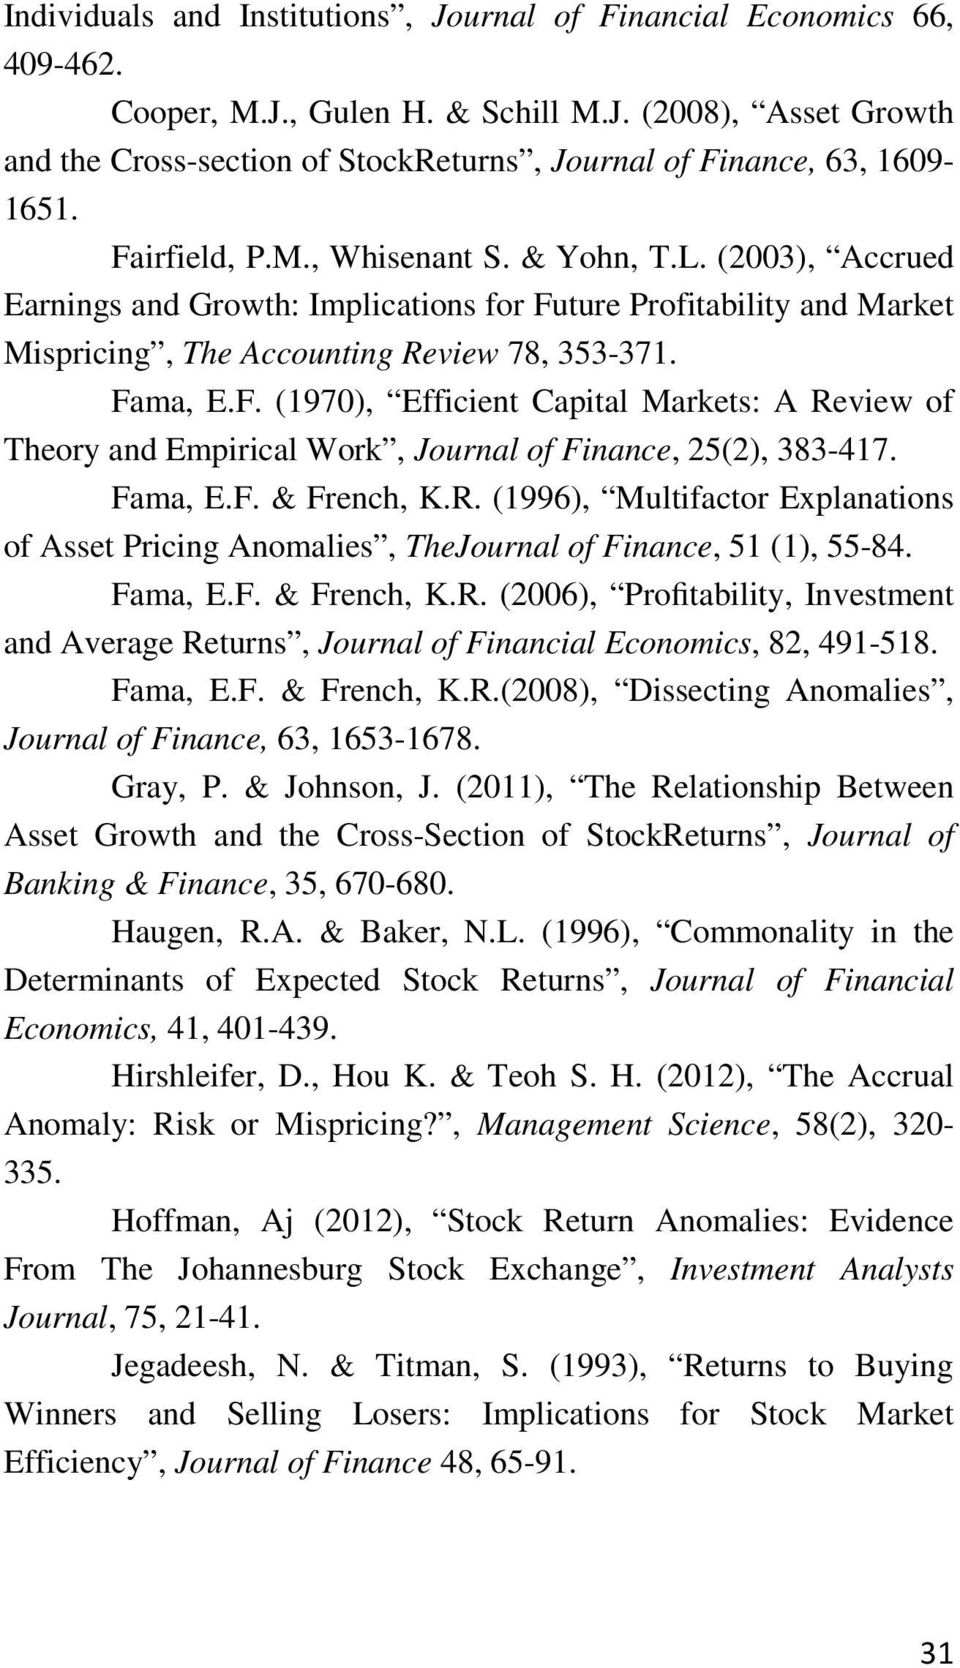 Fama, E.F. & French, K.R. (1996), Multifactor Explanations of Asset Pricing Anomalies, TheJournal of Finance, 51 (1), 55-84. Fama, E.F. & French, K.R. (2006), Profitability, Investment and Average Returns, Journal of Financial Economics, 82, 491-518.